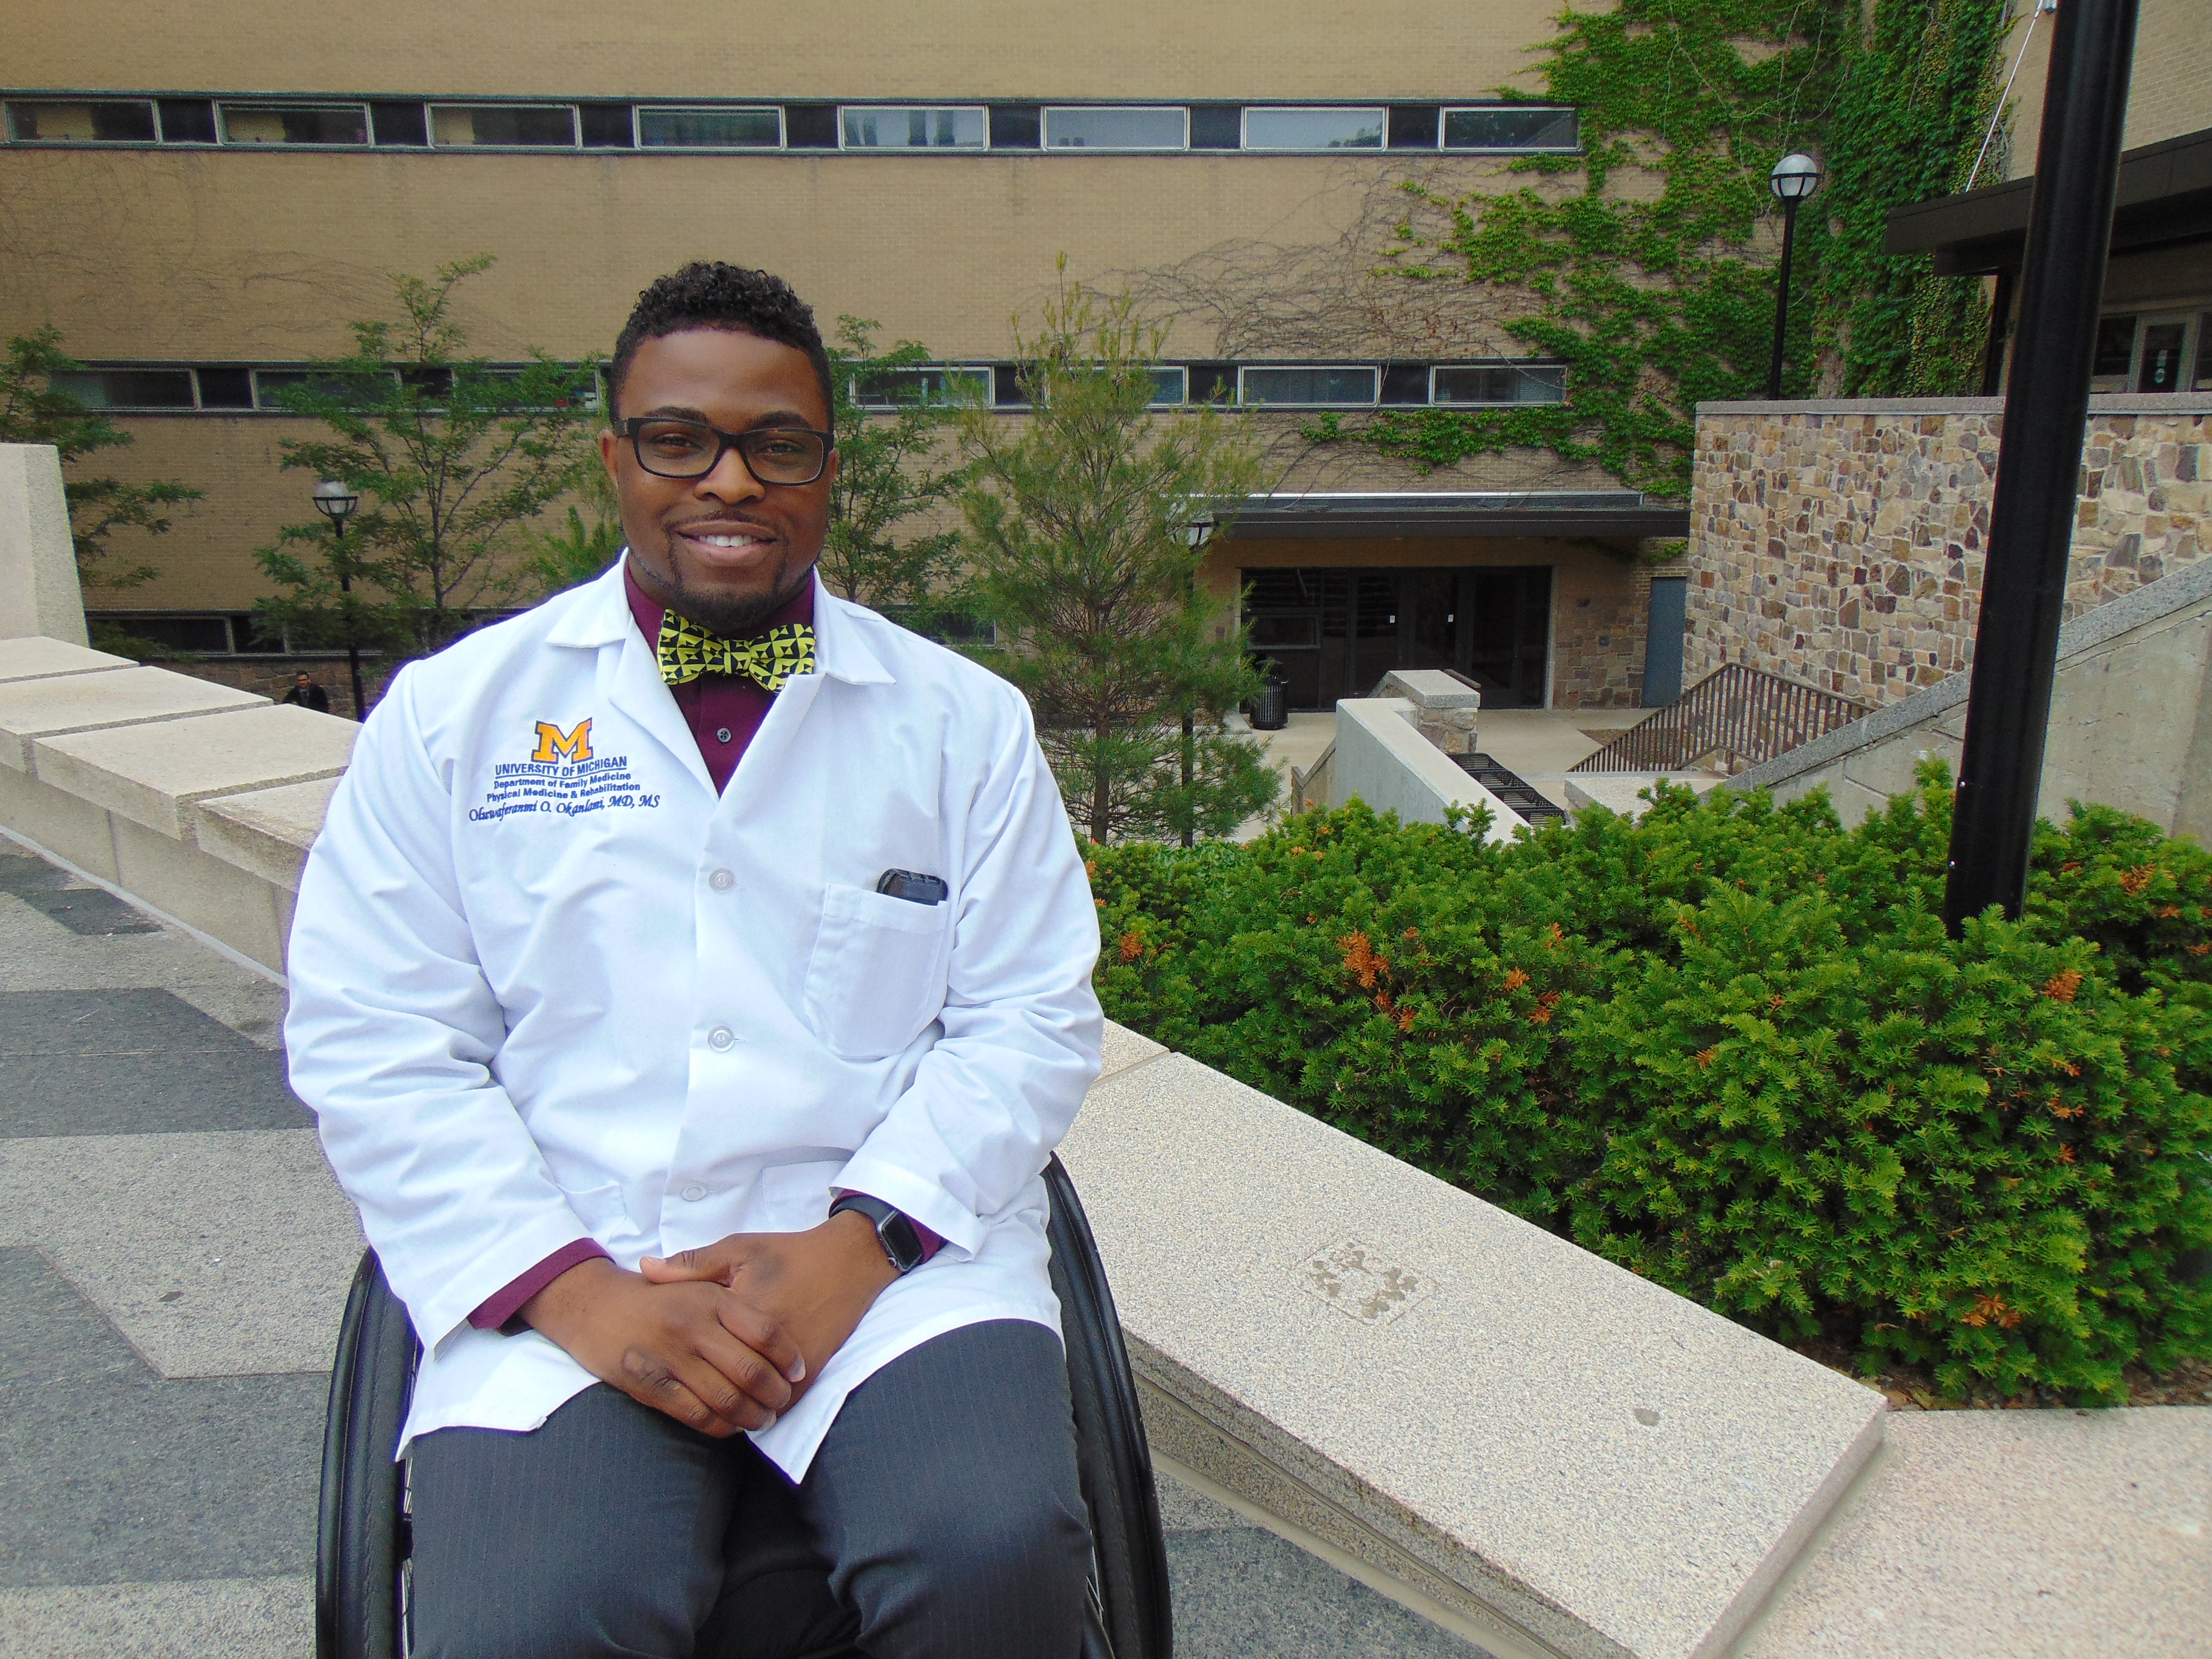 Dr. Oluwaferanmi Okanlami poses in his wheel chair in front of the U-M Medical School. He is wearing a white physician's coat. 